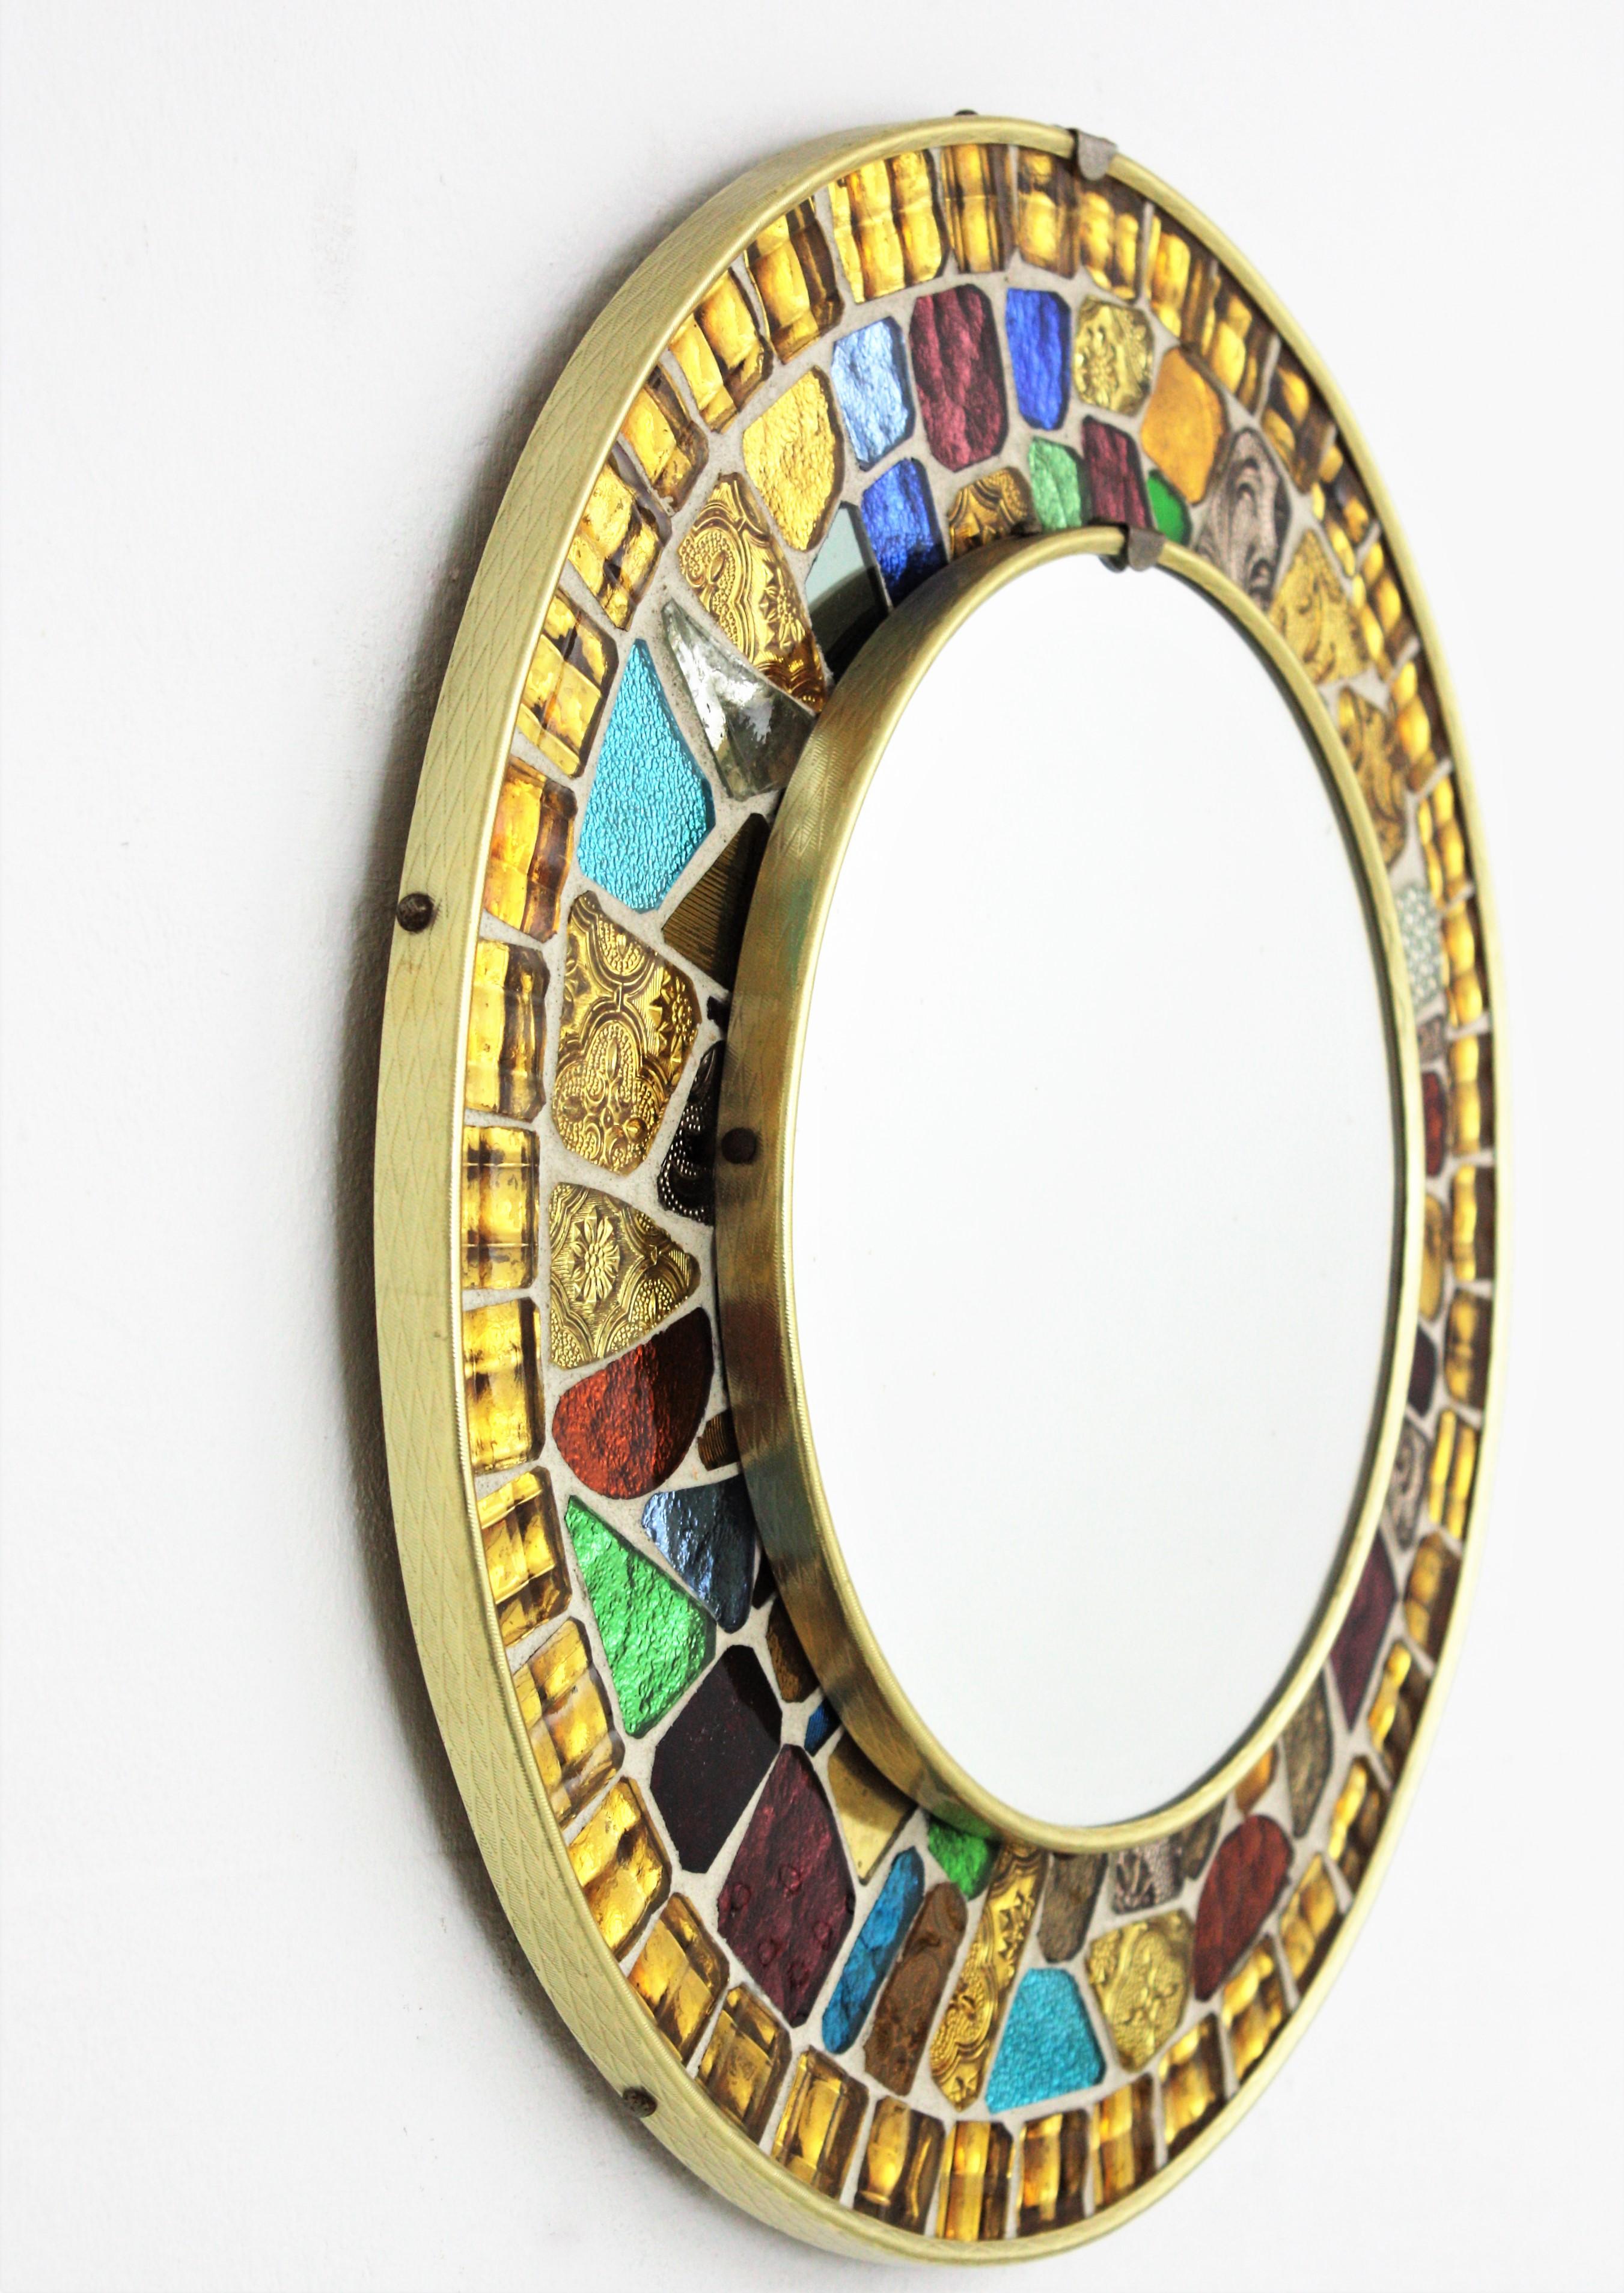 Brass Midcentury Round Mirror with Muti Color Glass Mosaic Frame, 1960s For Sale